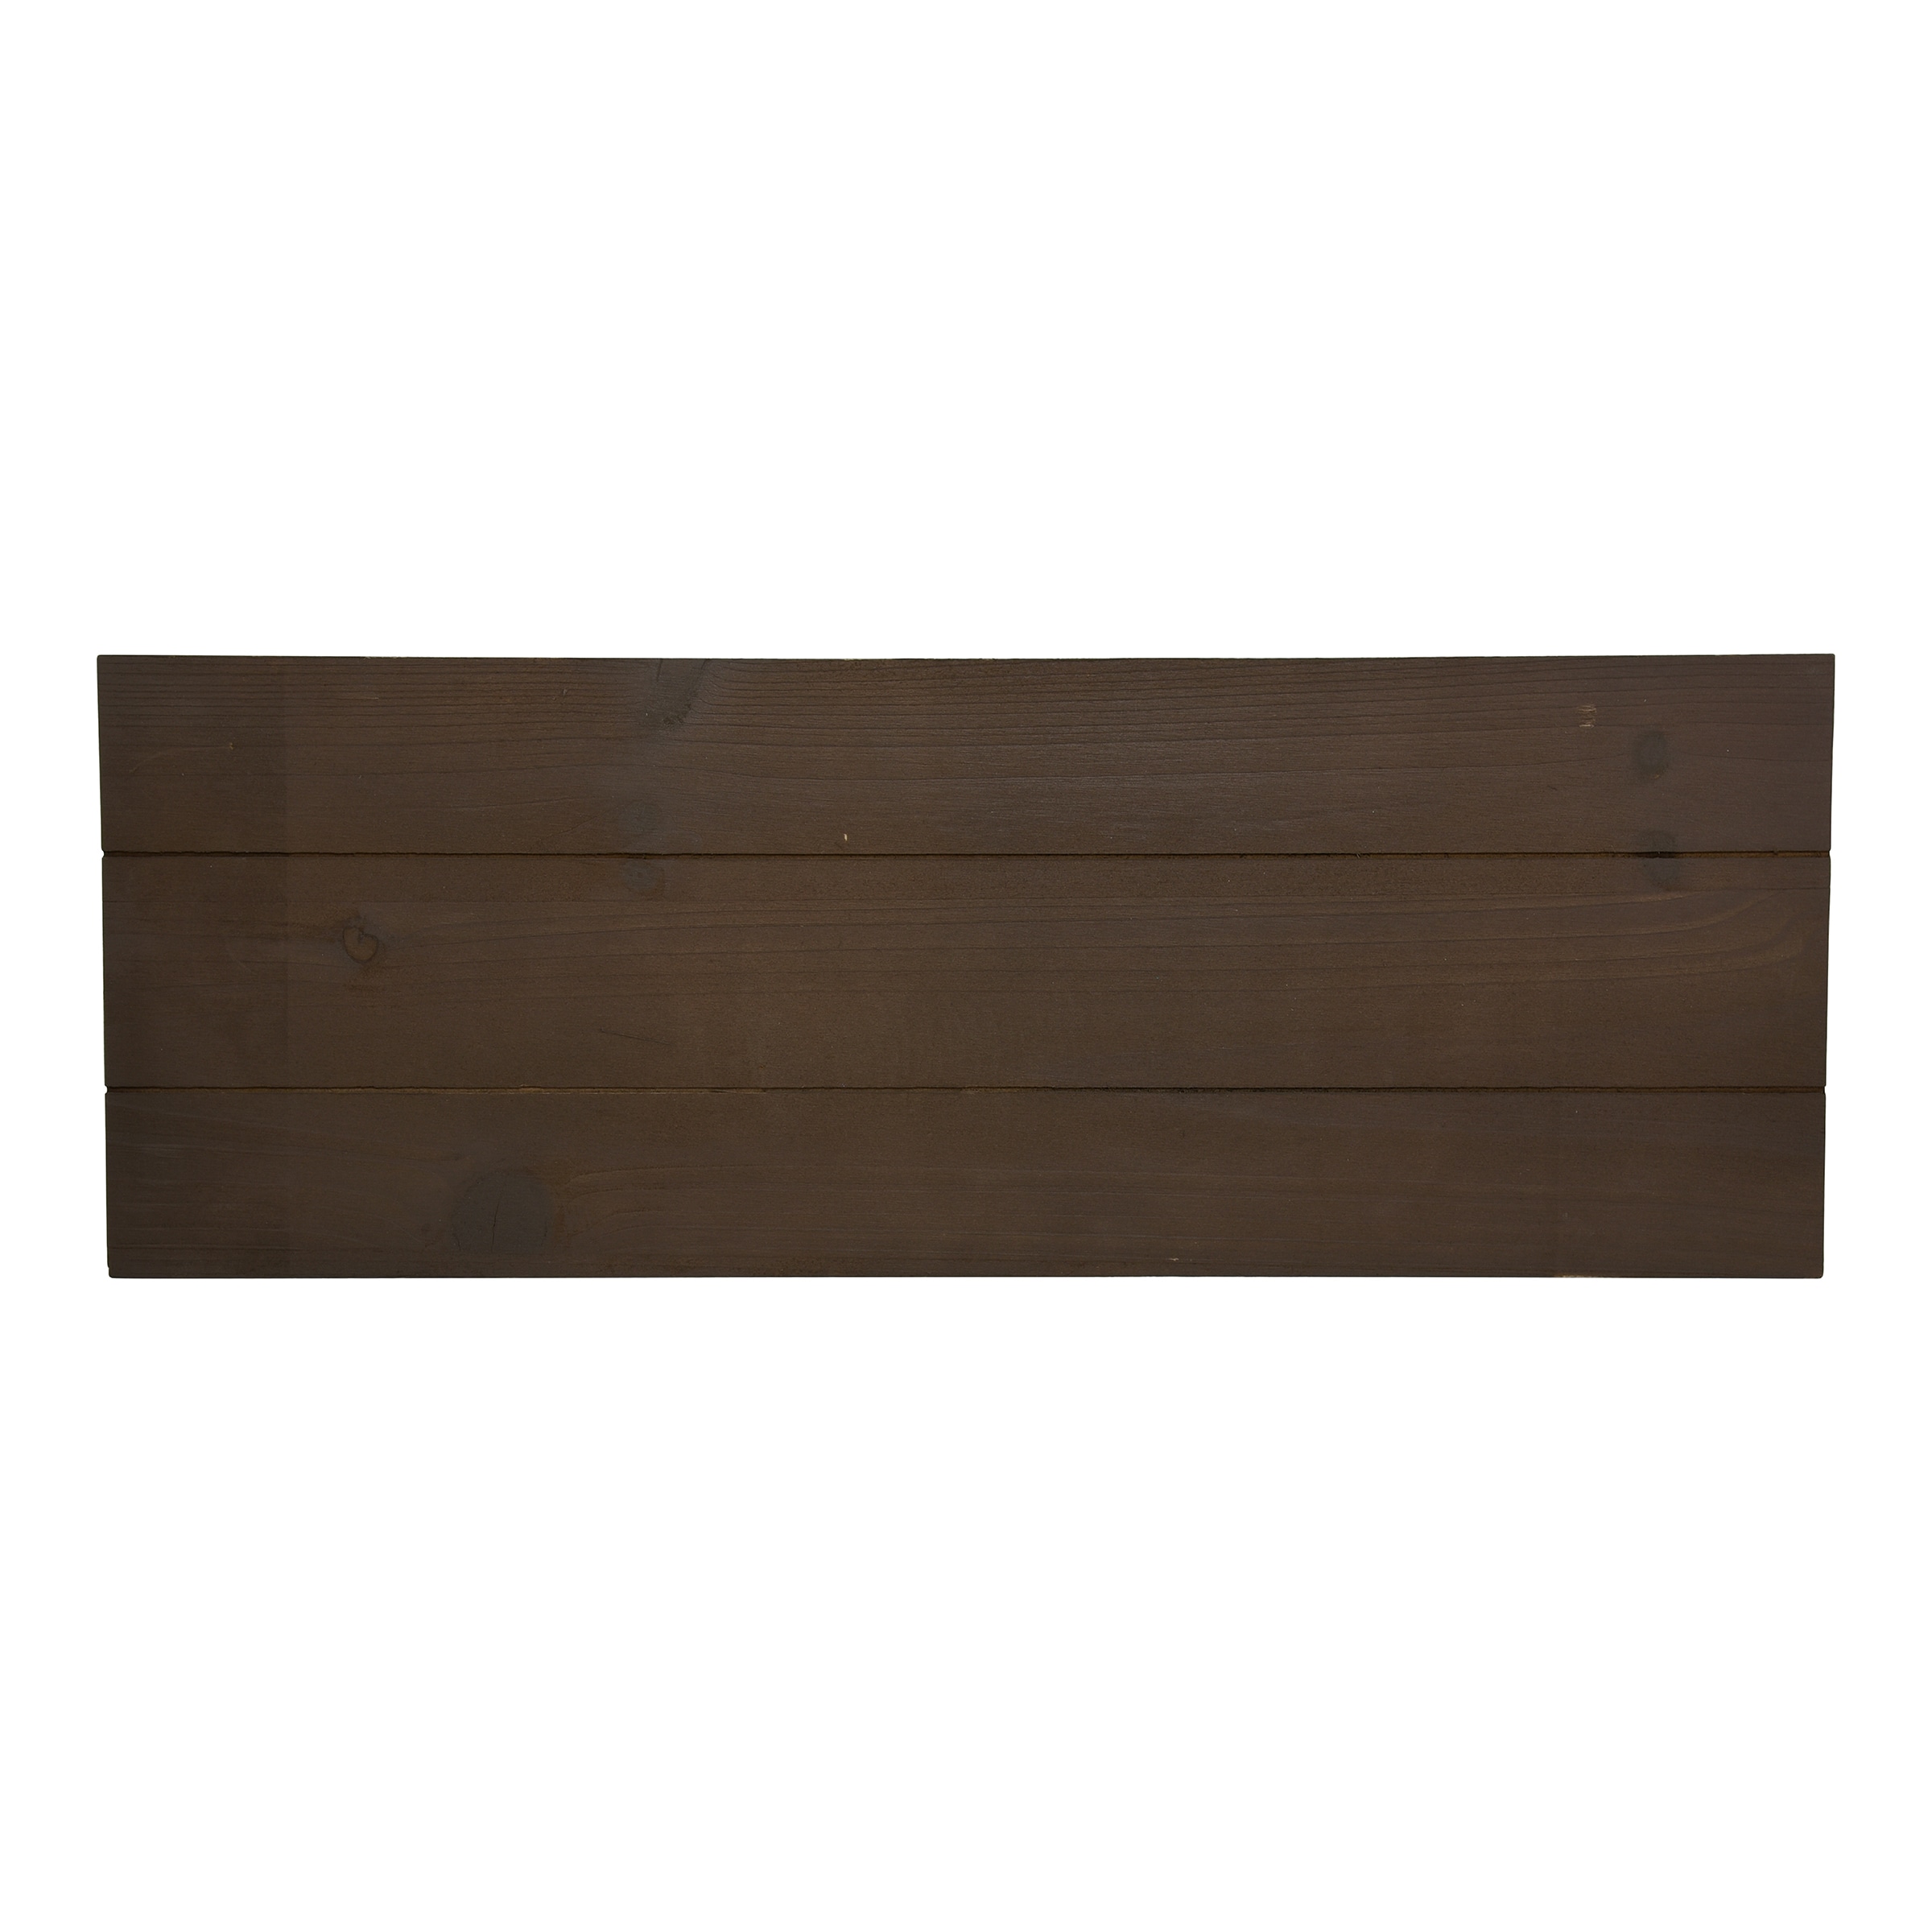 Hillman 6-in H x 17-in W Natural Pine Wood Address Plaque at